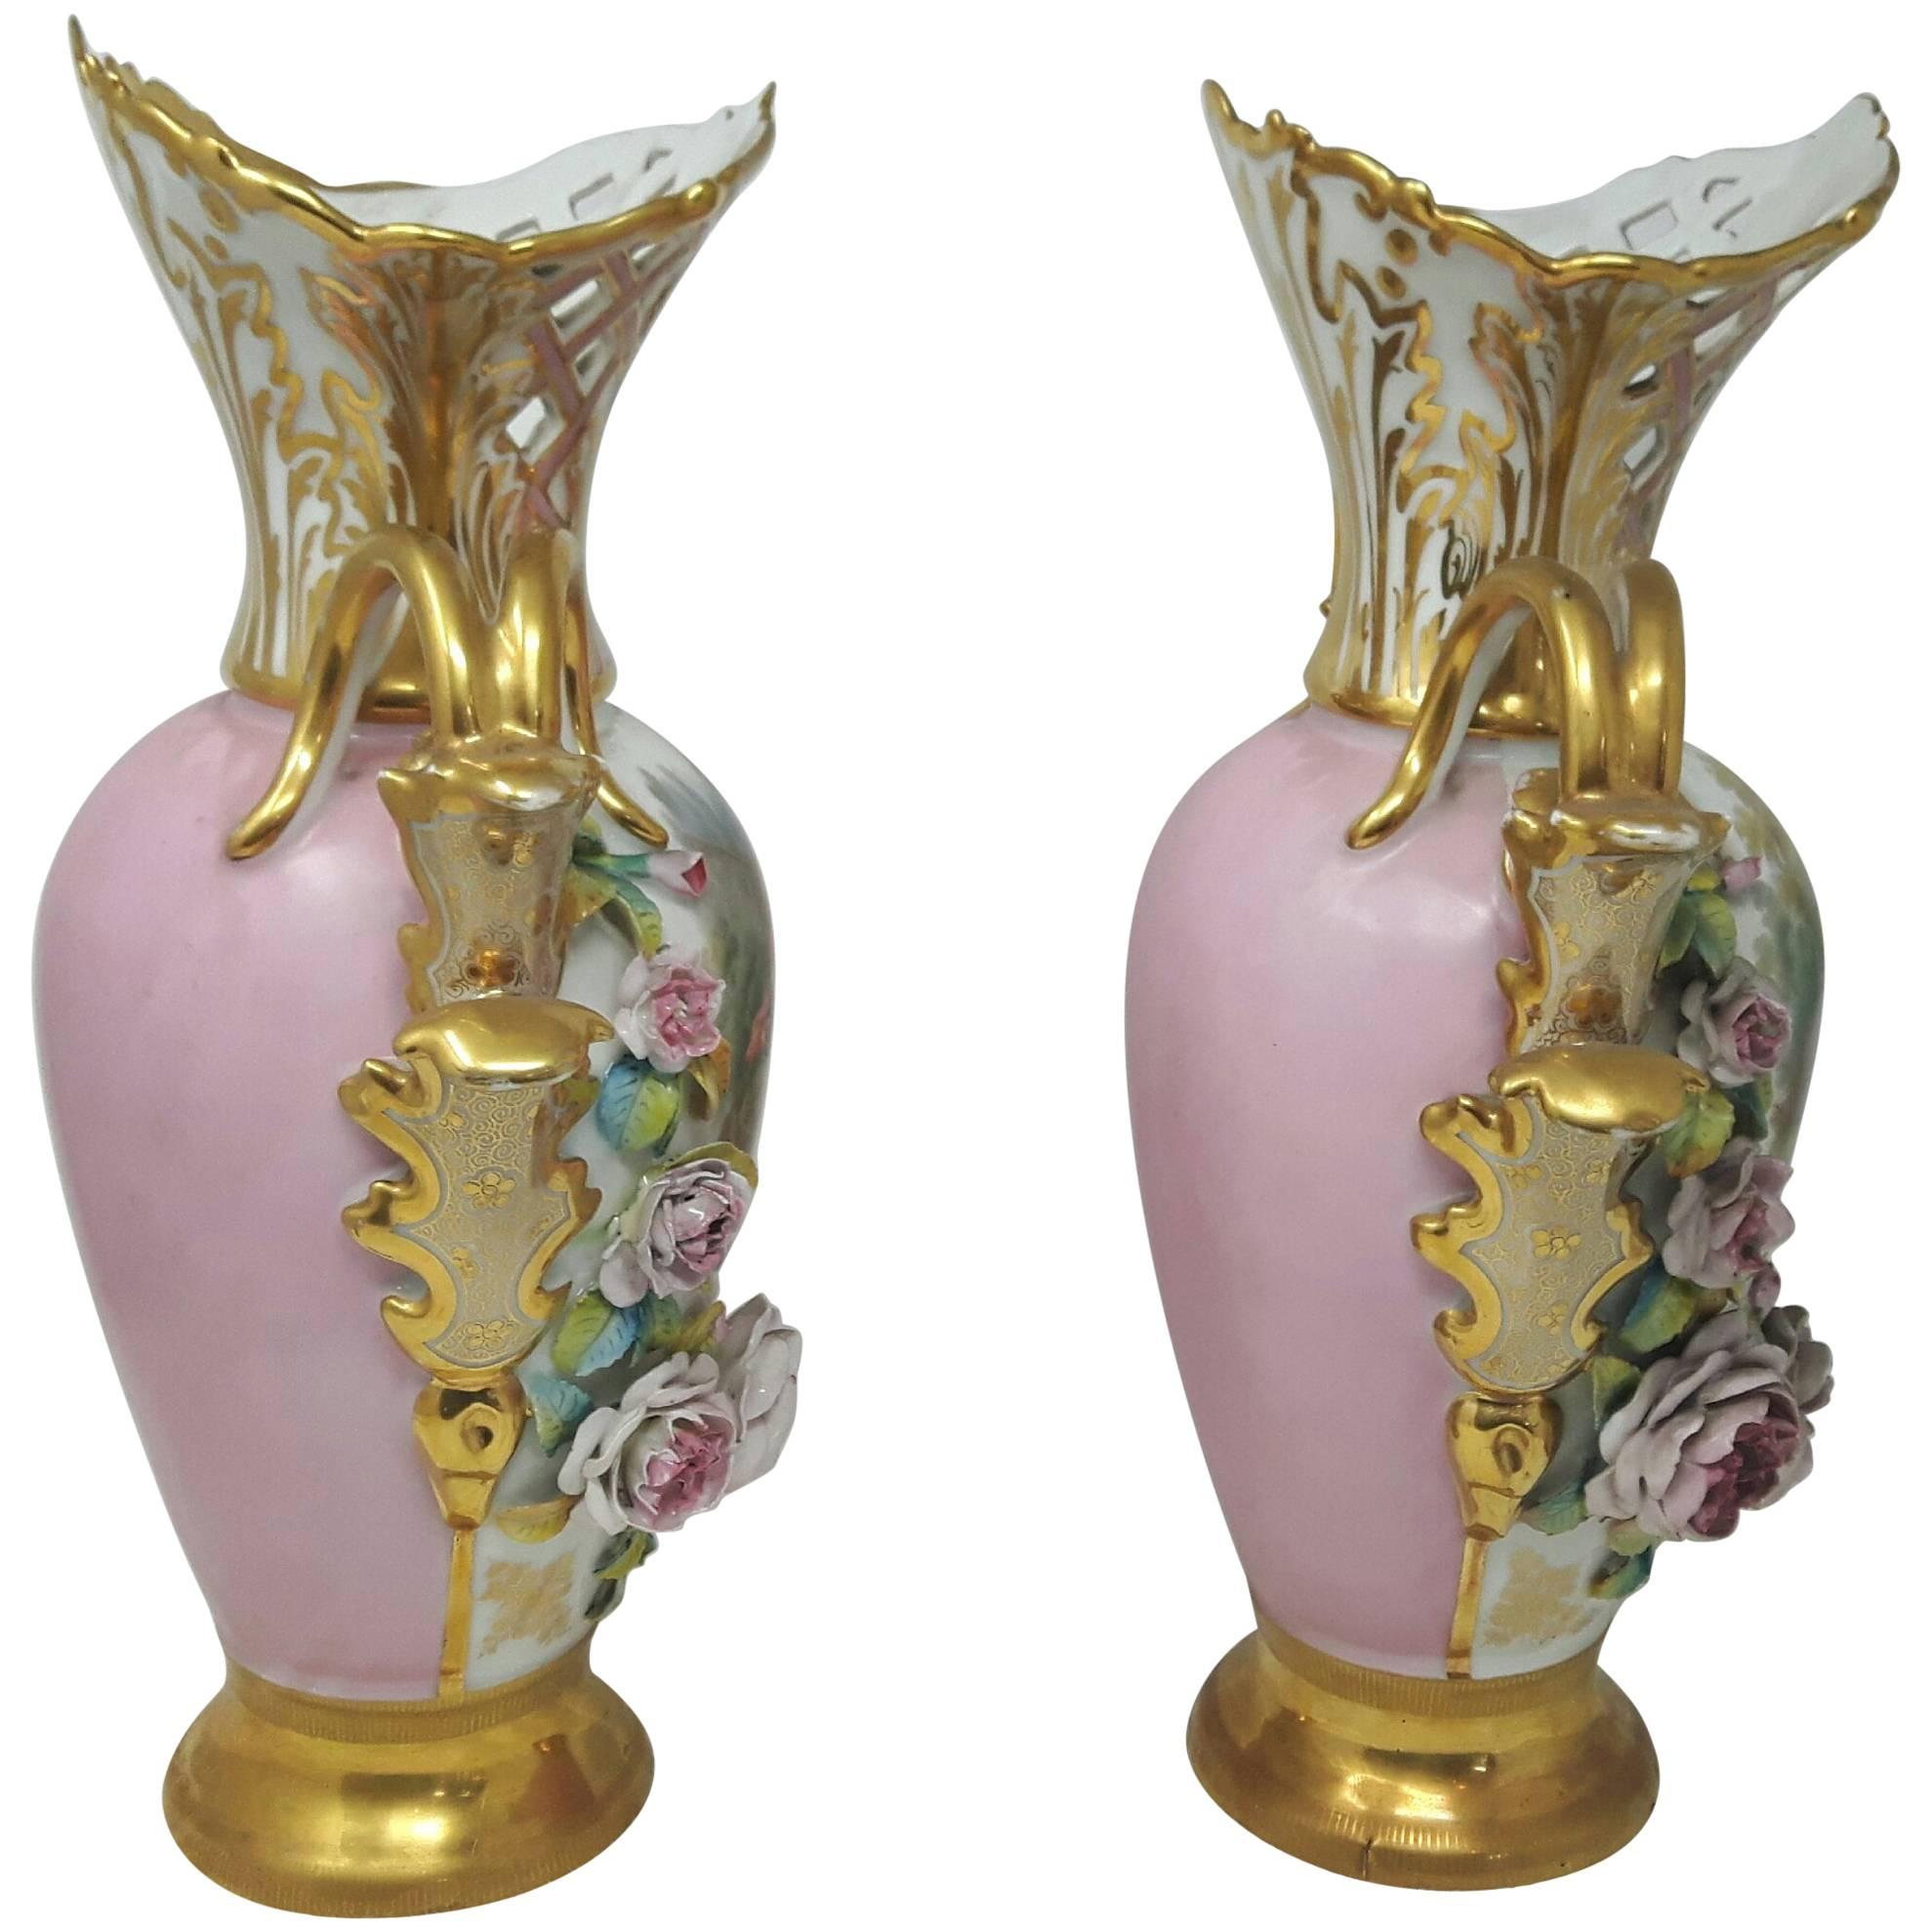 A Regency style pair of Paris porcelain vases with delightful hand-painted panels of pastoral children's scenes, surrounded by encrusted flowers on a gilded base. The latice worked necks are adorned by a large white and gilt leaf, and gilded